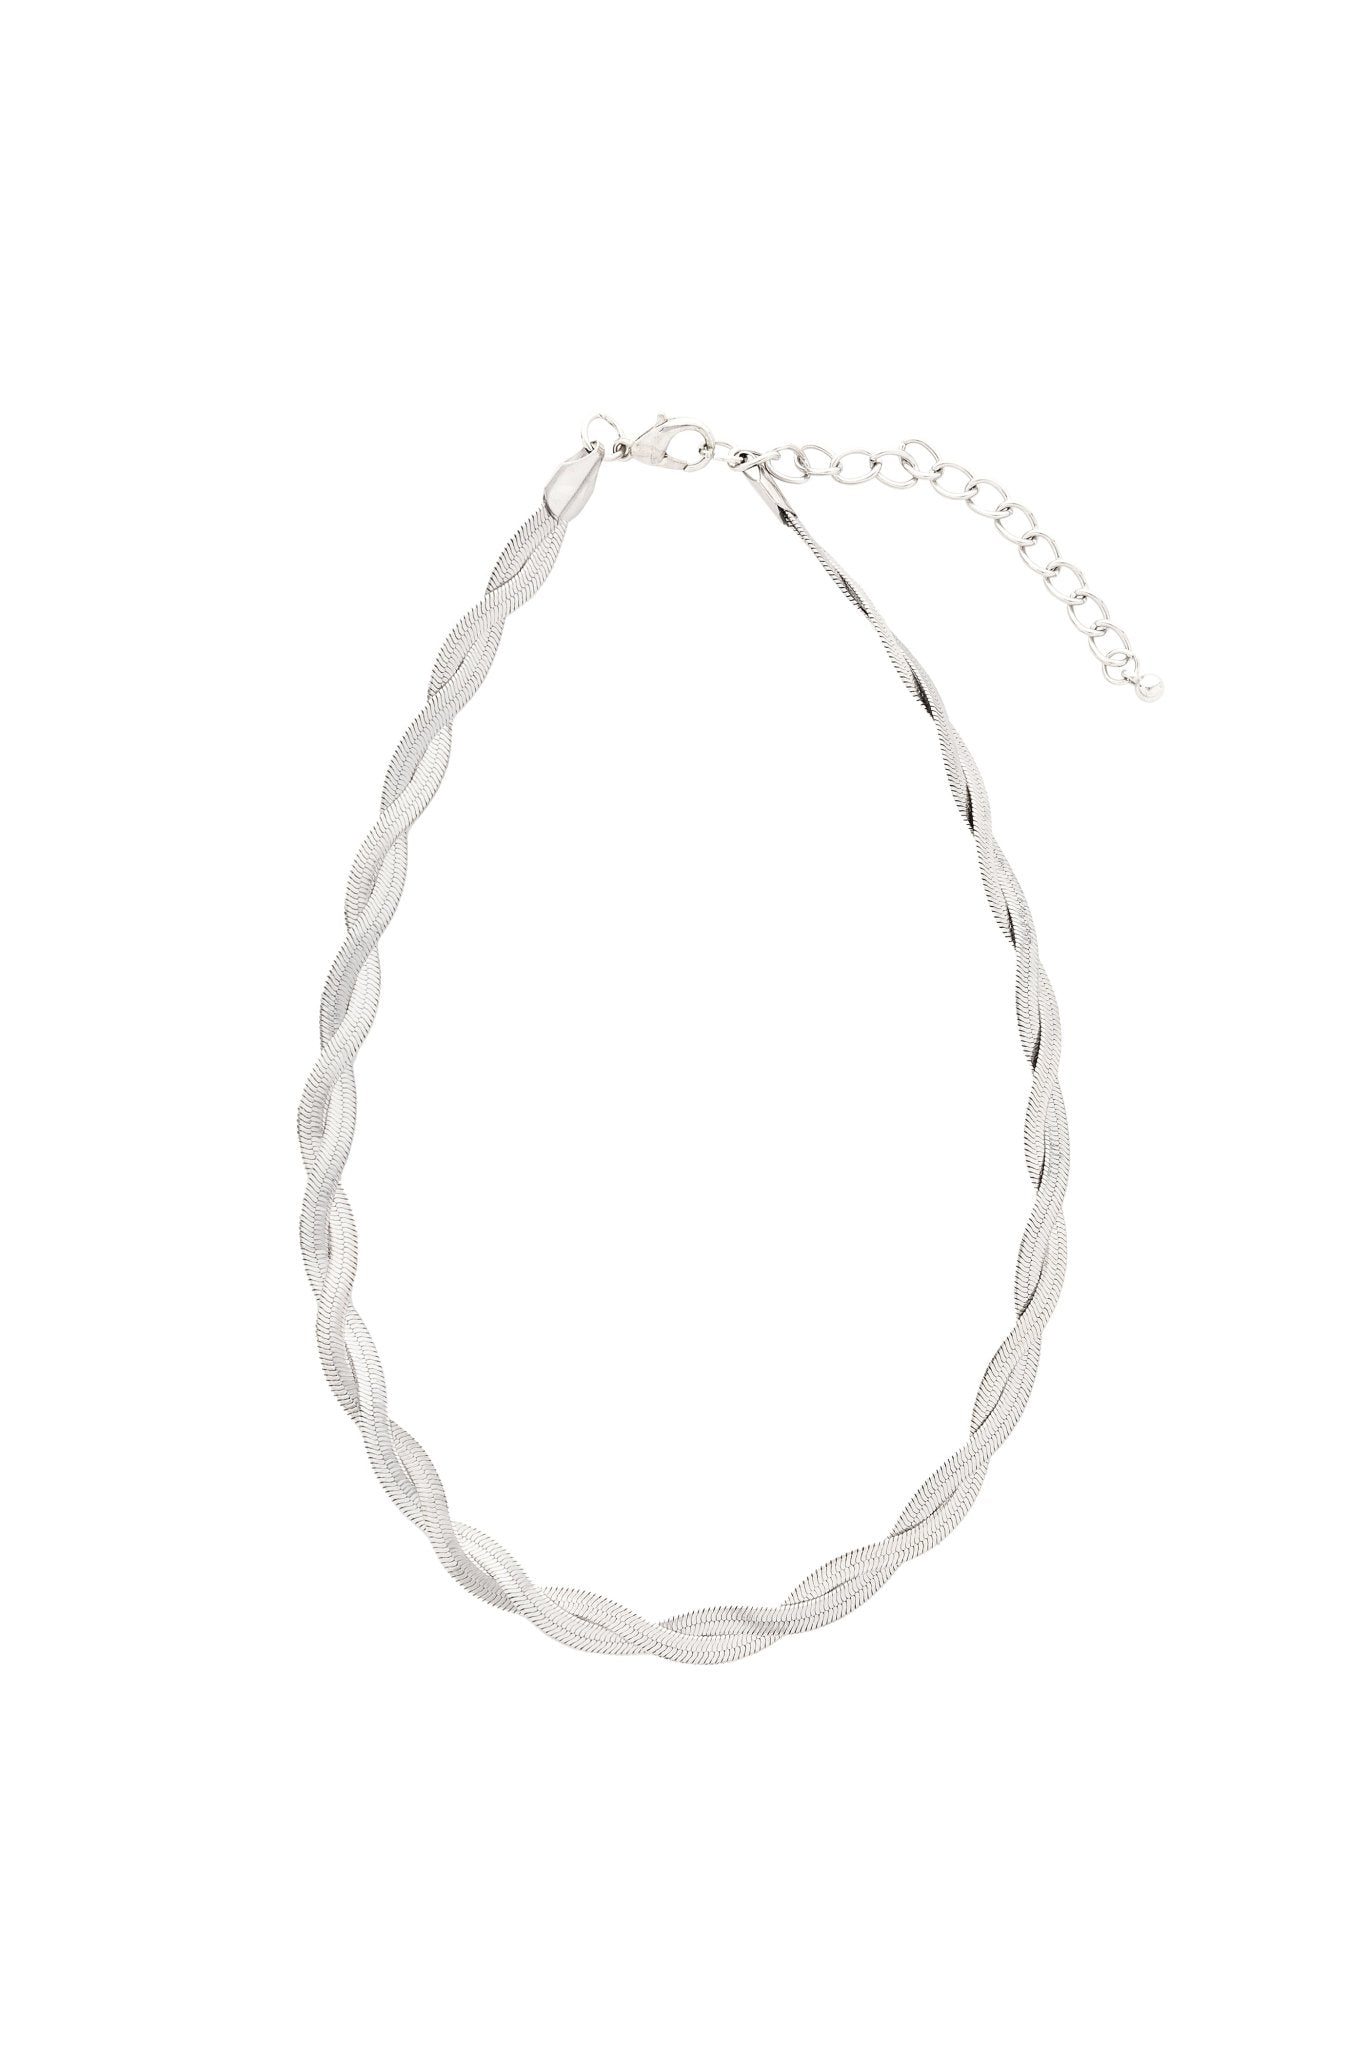 Intertwined Chain Necklace - Silver - YG COLLECTION